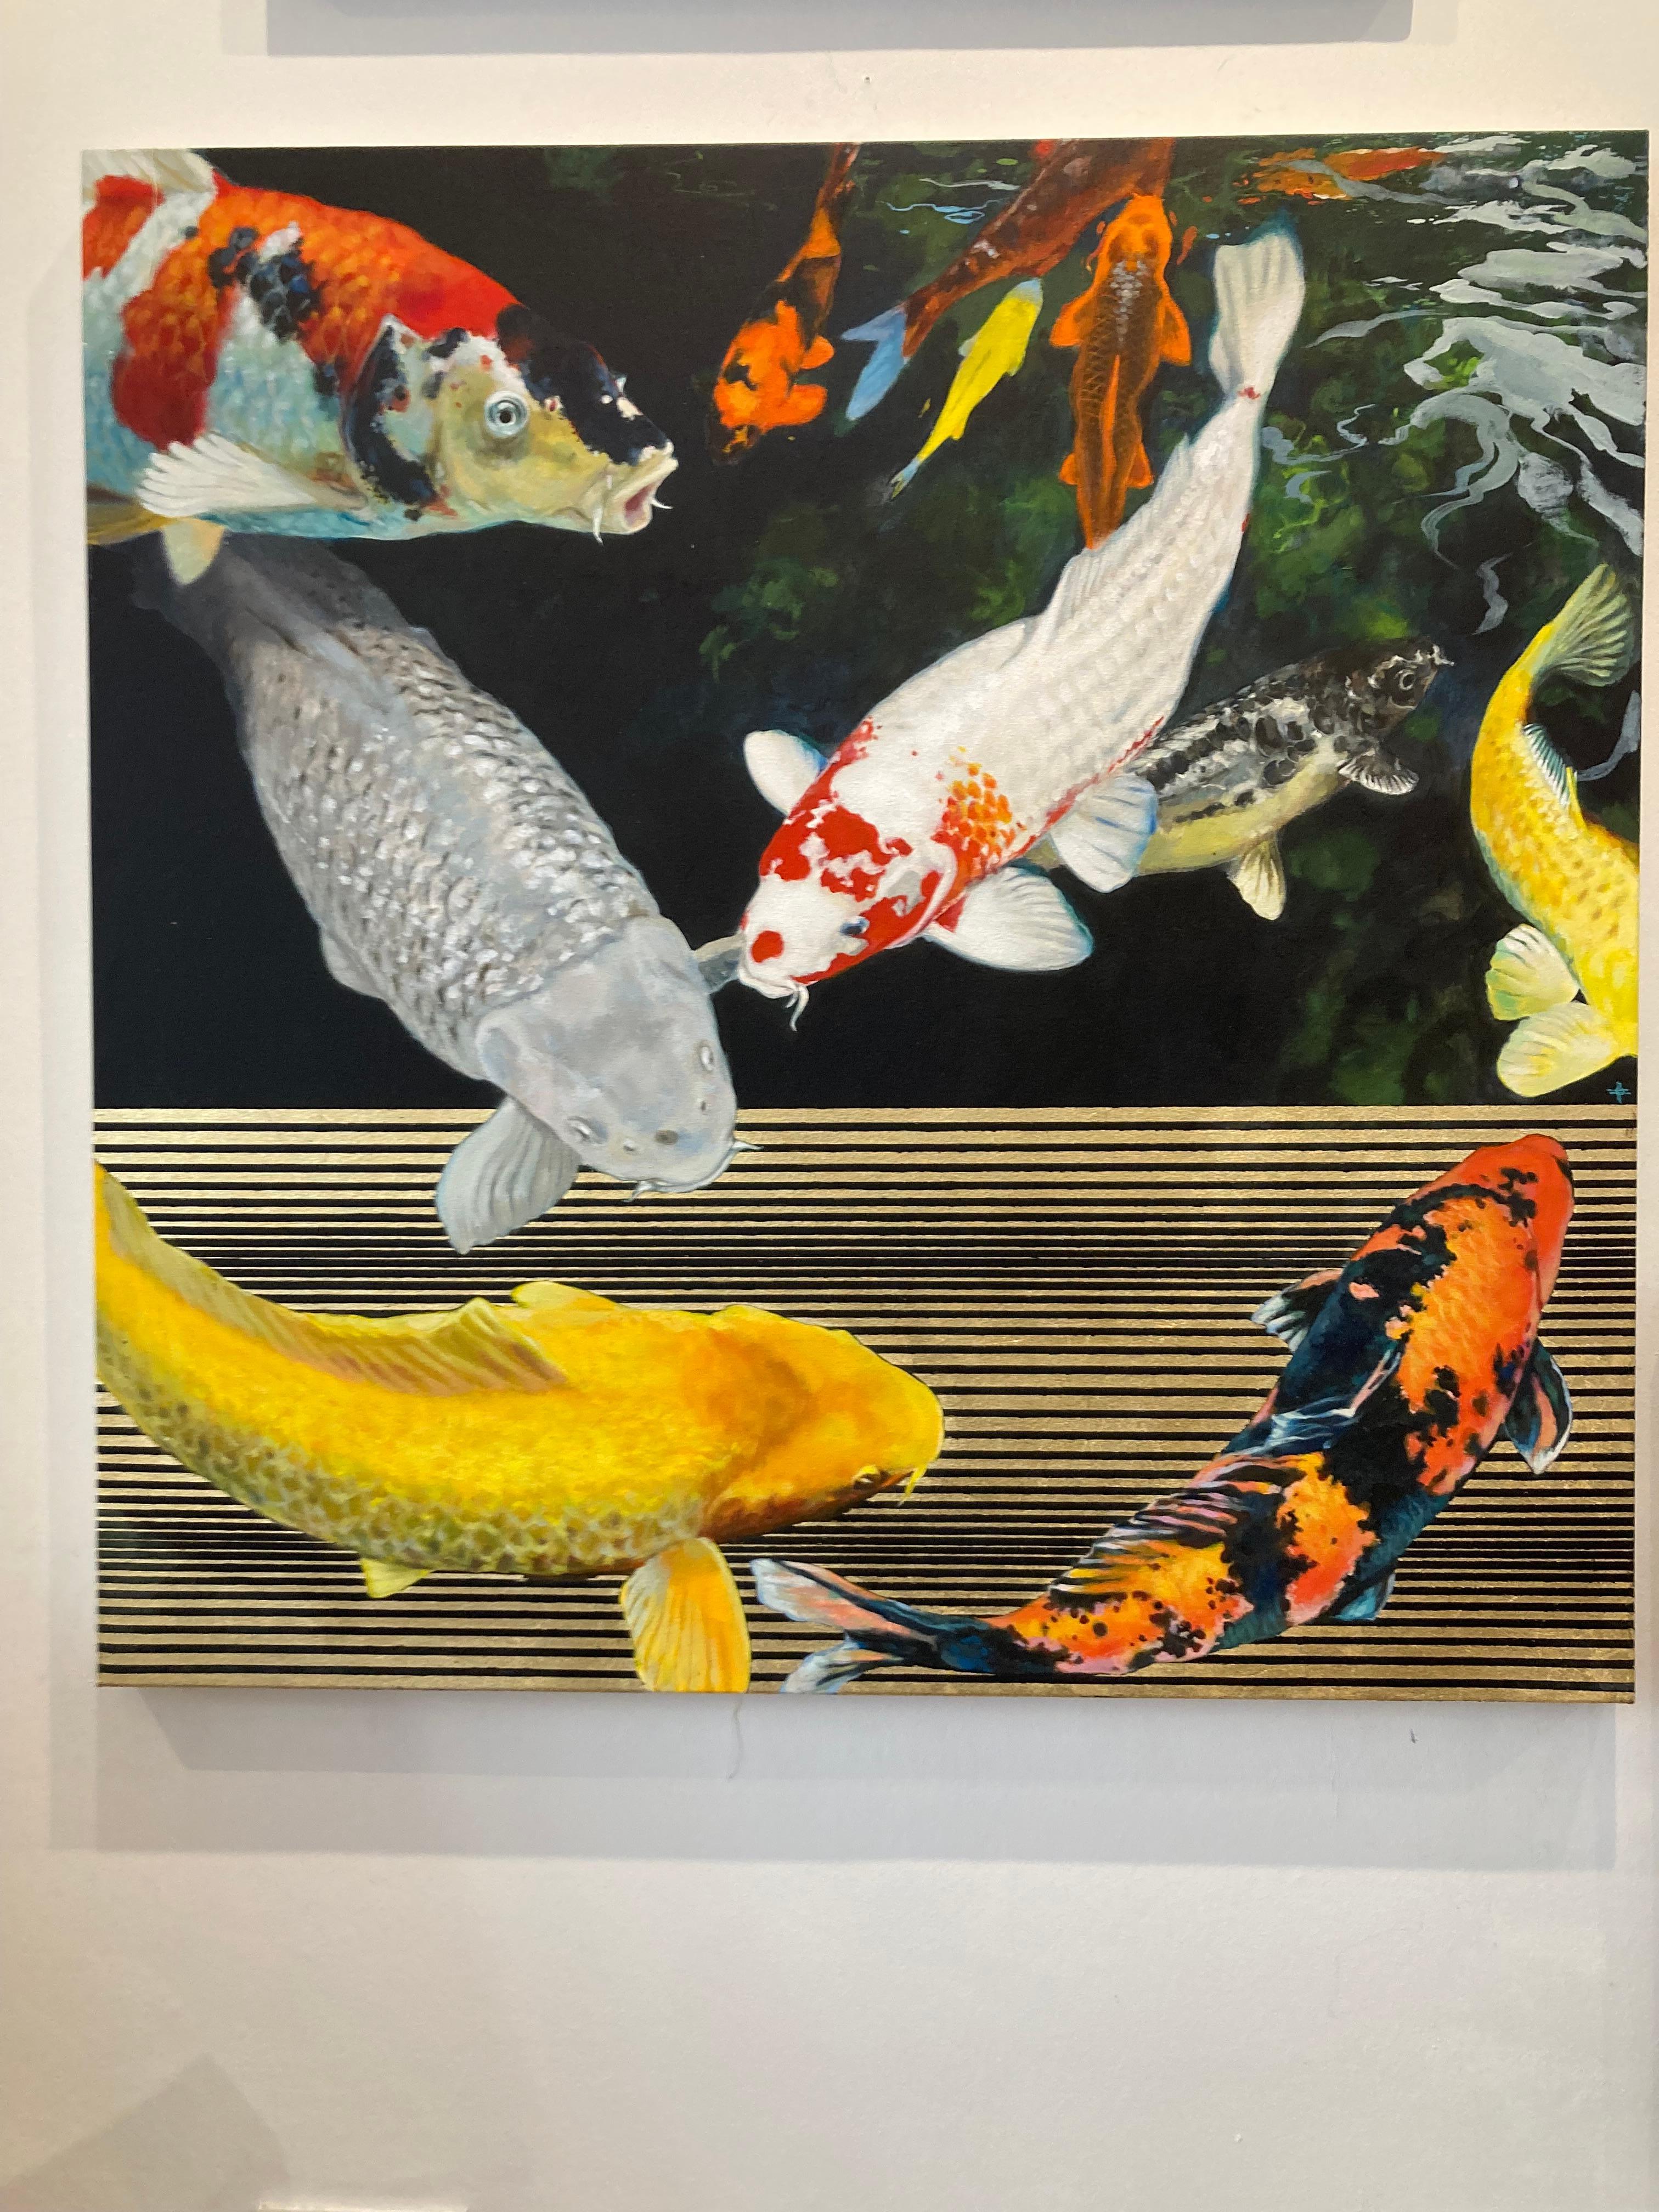 Citius -contemporary decorative koi fish pond golden strips mixed media painting - Painting by Keng Wai Lee